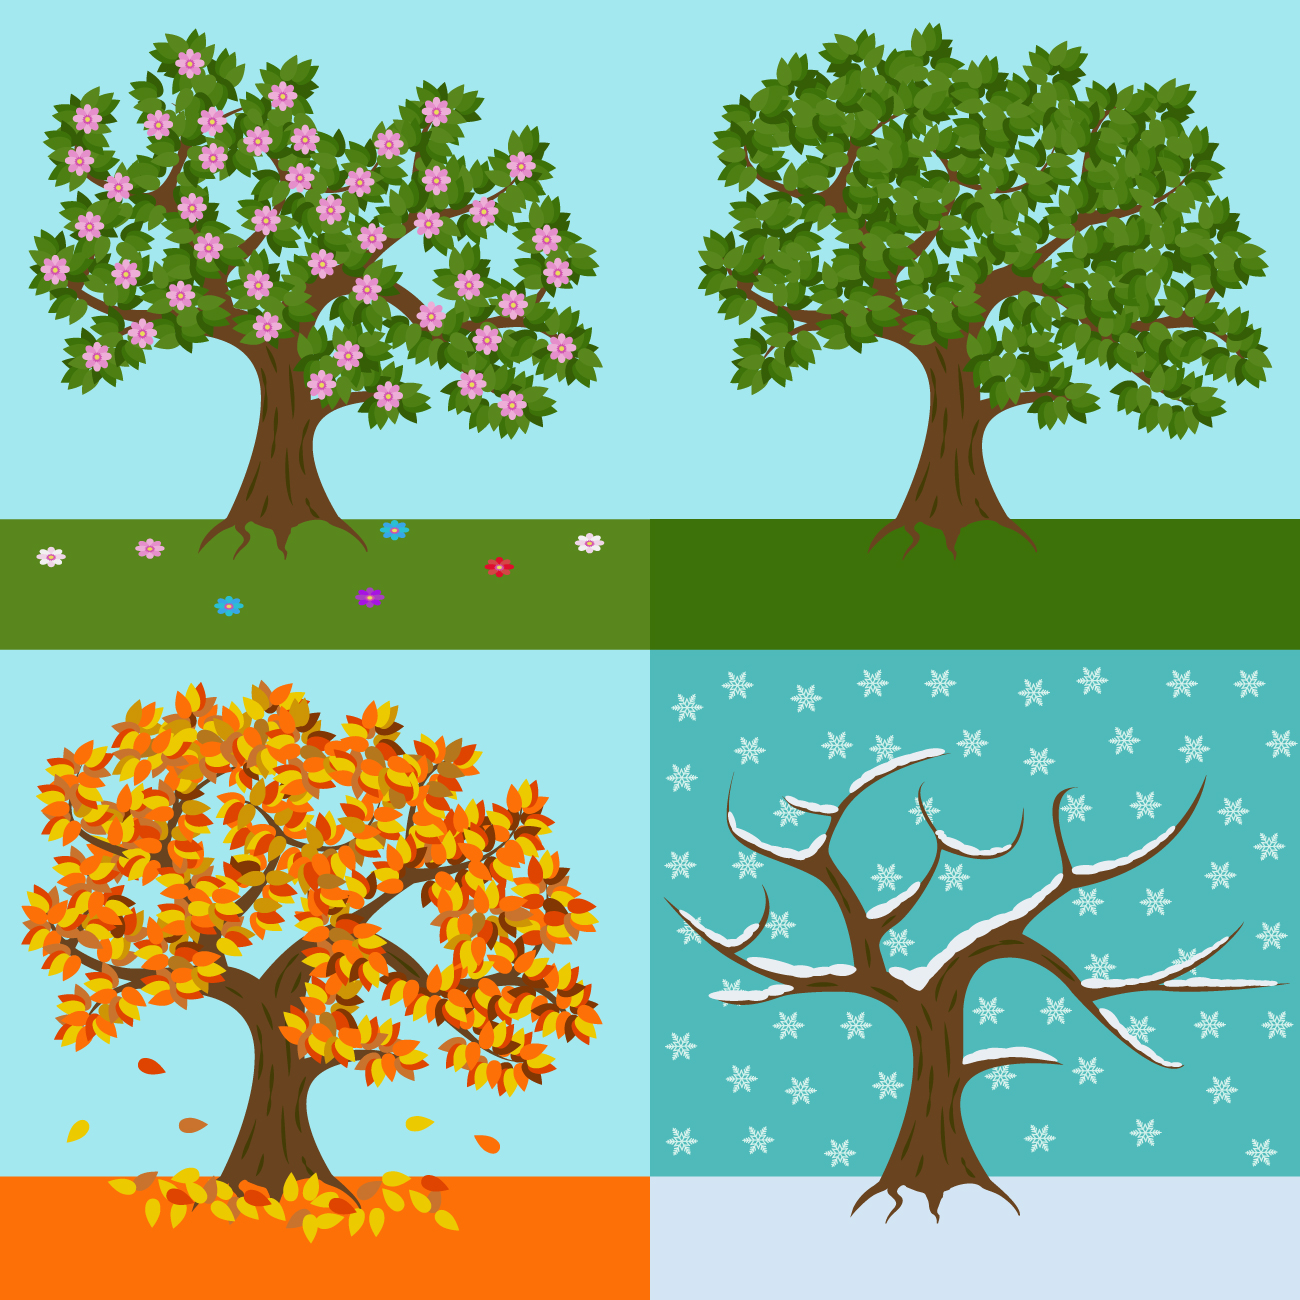 A graphic is split into quadrants with a tree in each section representing a season